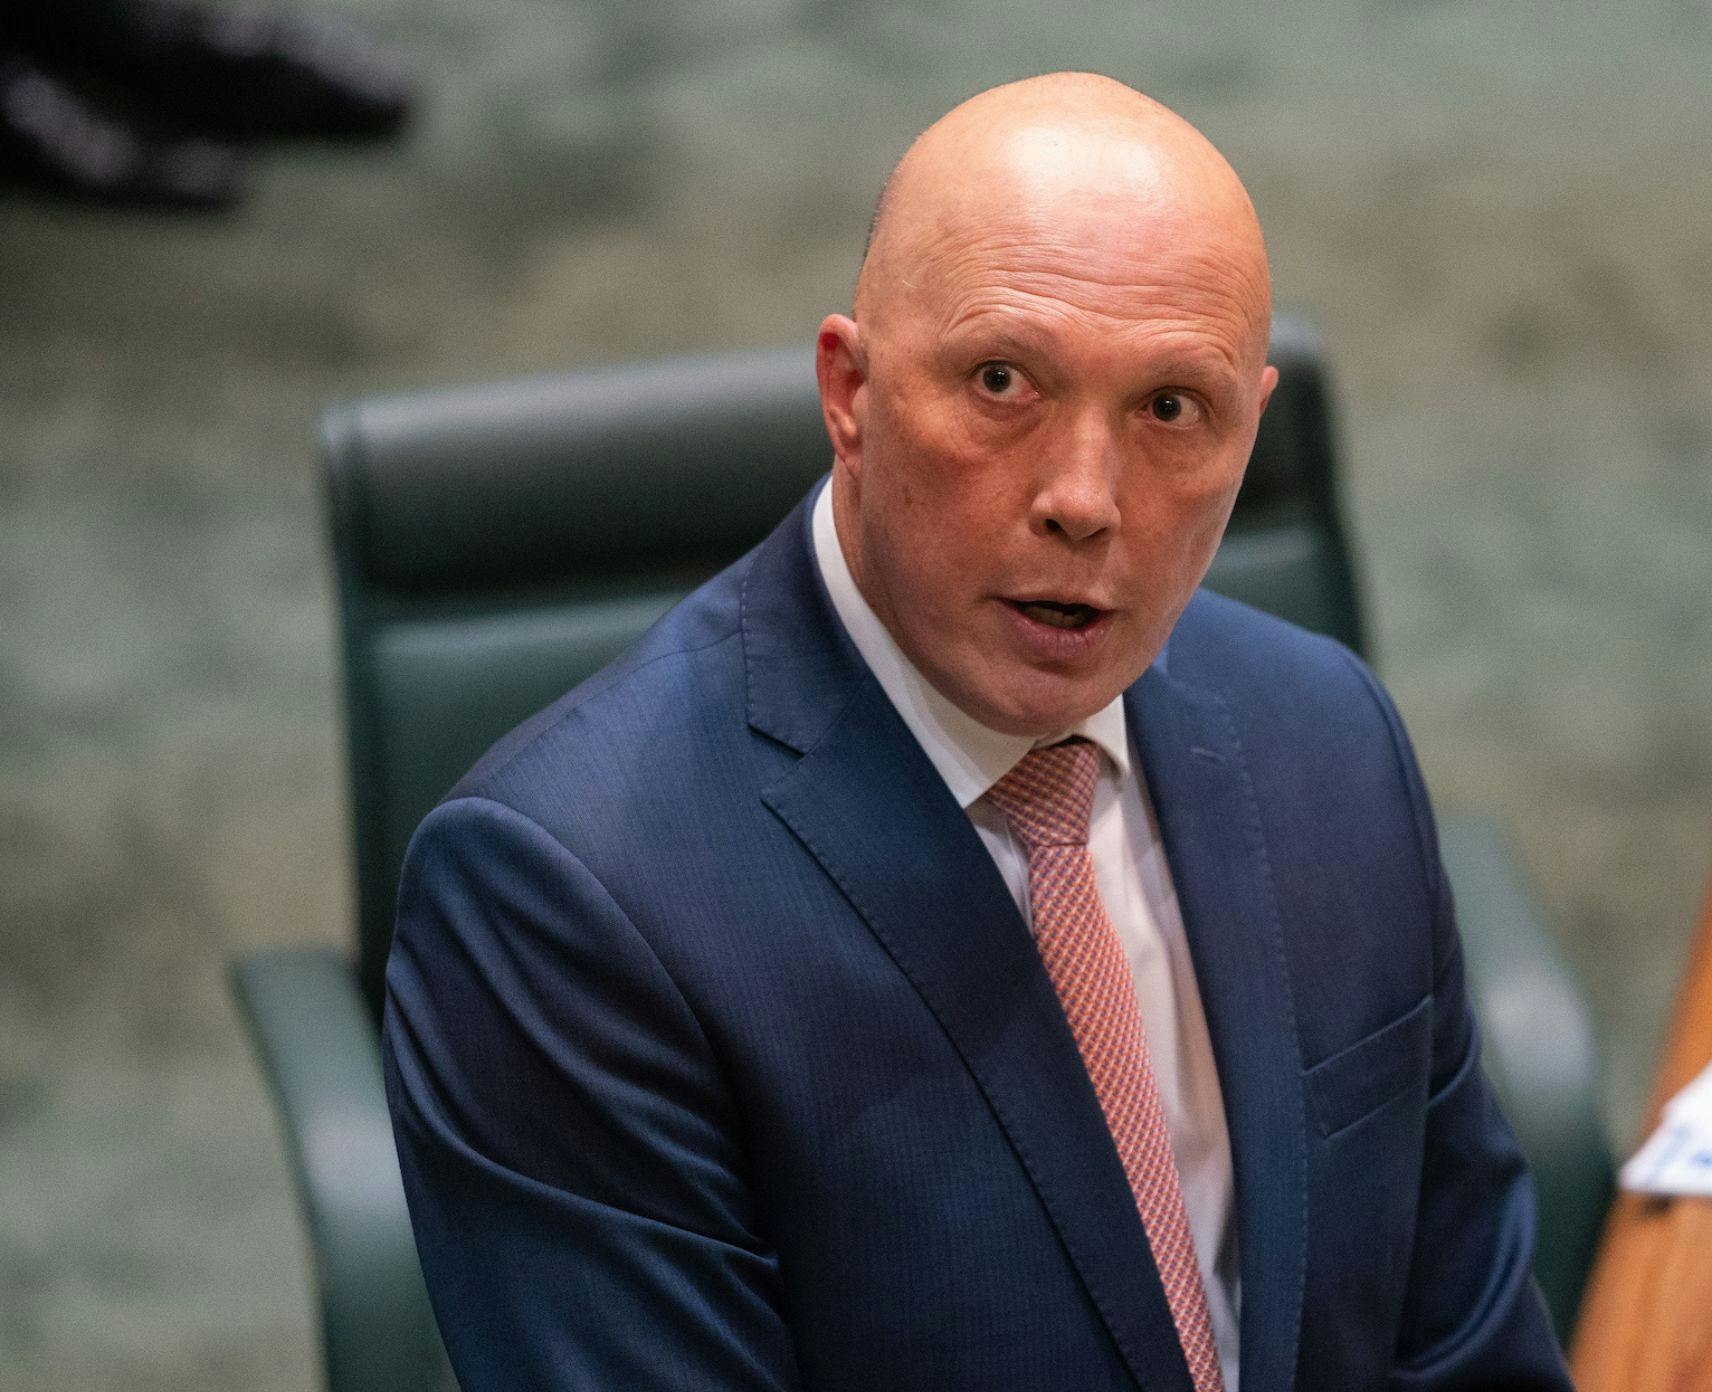 Peter Dutton in the House of Representatives